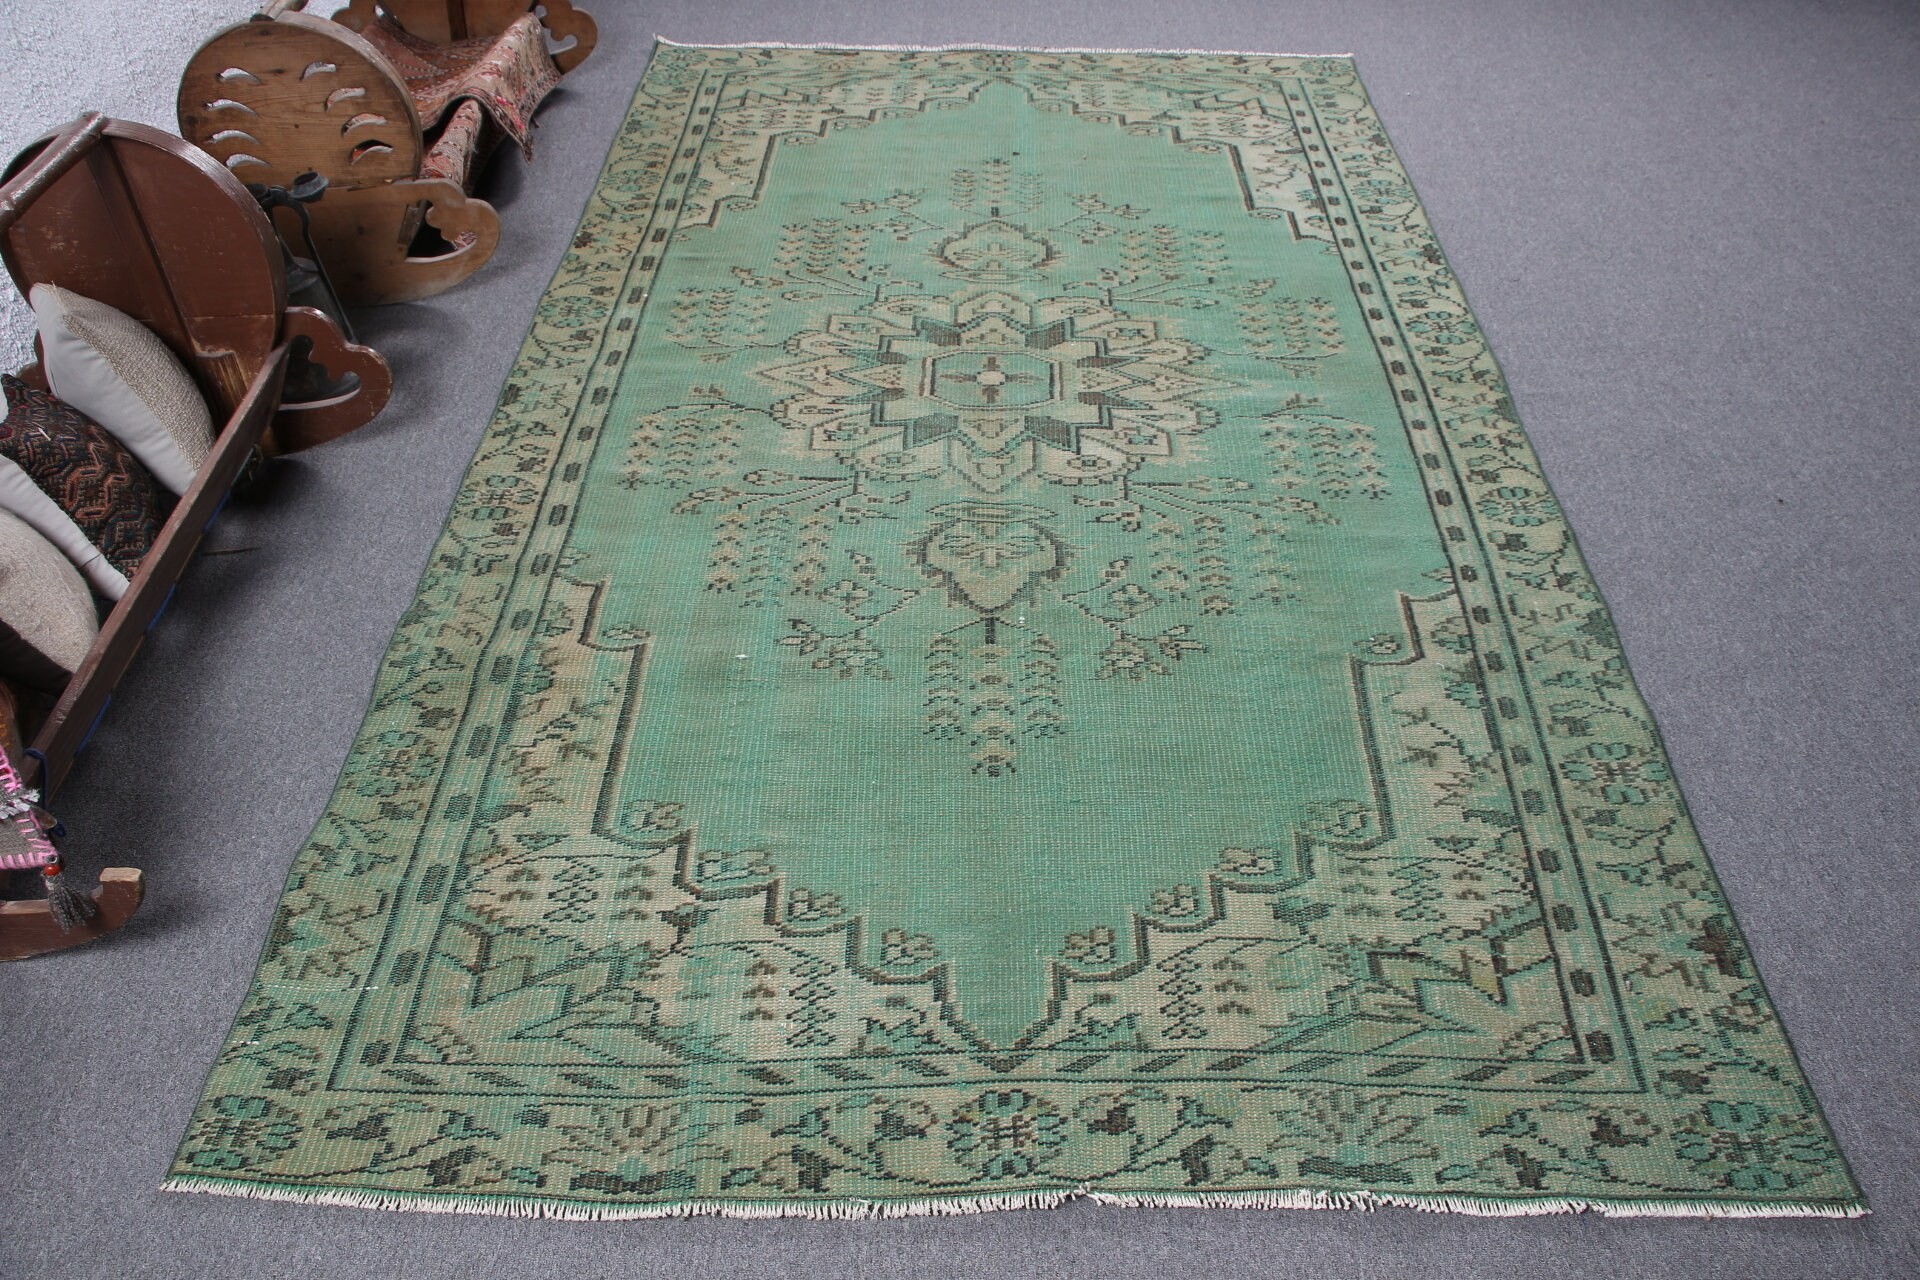 Vintage Rugs, Turkish Rug, Rugs for Salon, Salon Rugs, Anatolian Rugs, Bedroom Rug, Kitchen Rugs, 5.2x9.2 ft Large Rug, Green Moroccan Rug